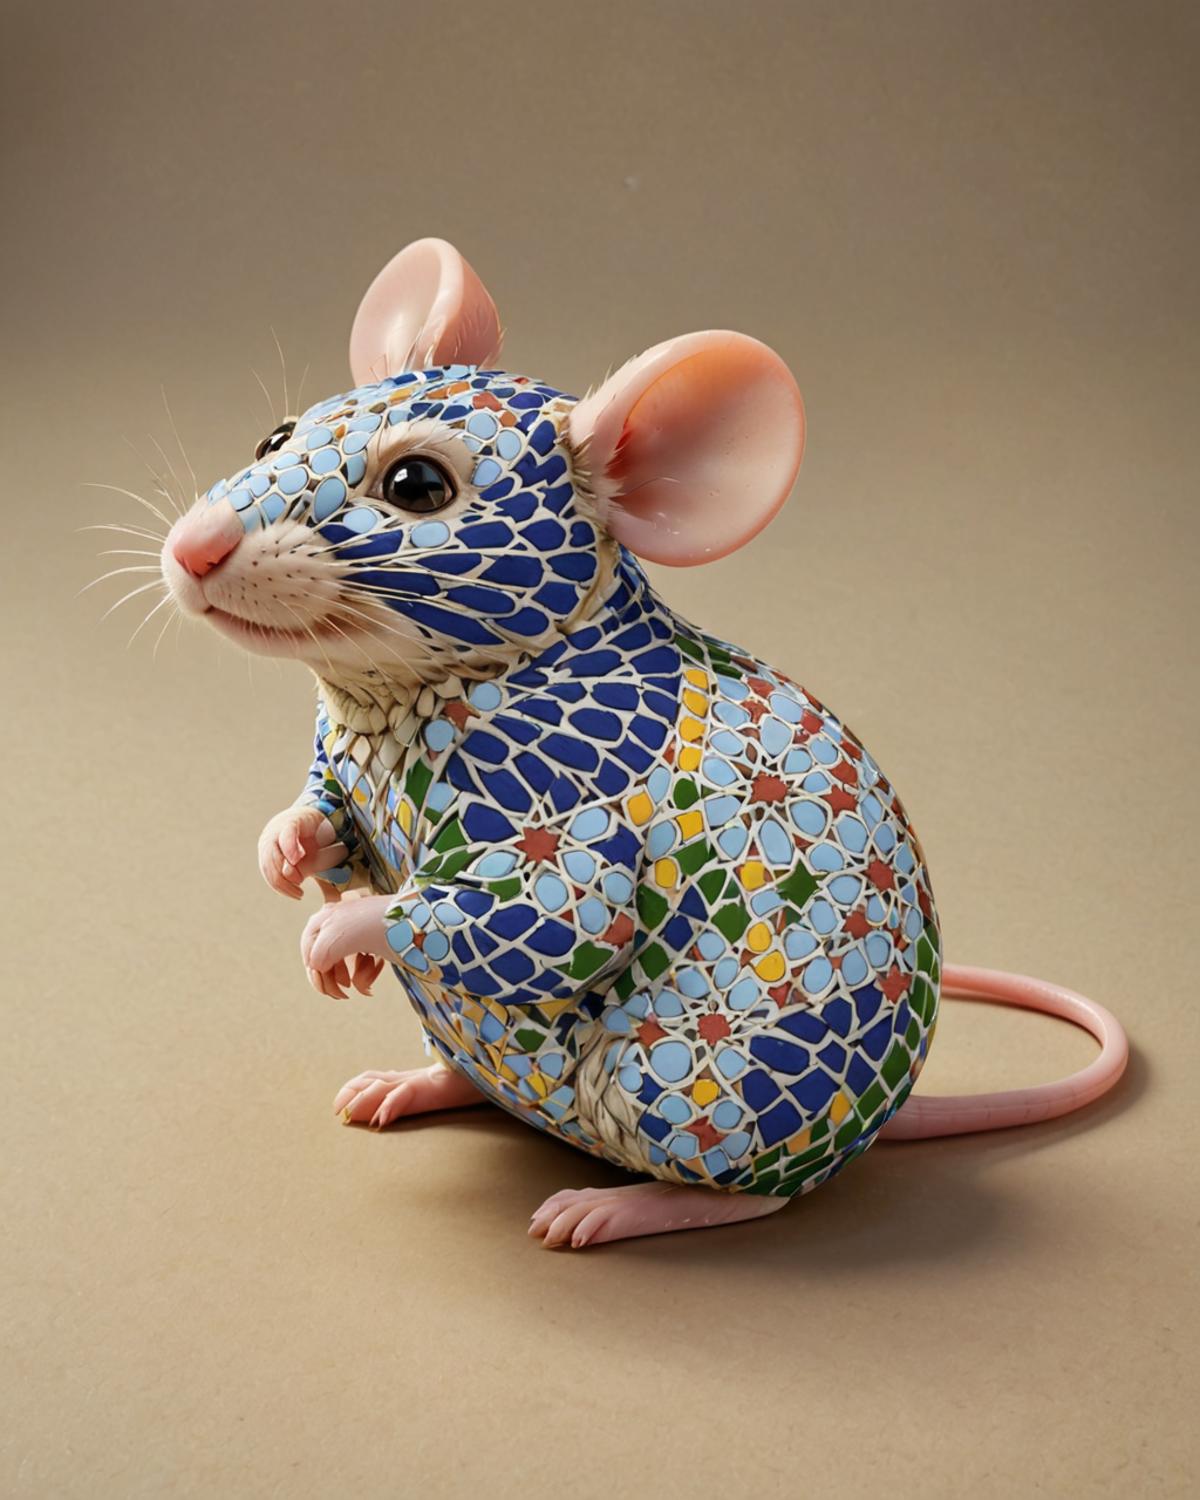 A small mouse is painted with colorful designs.